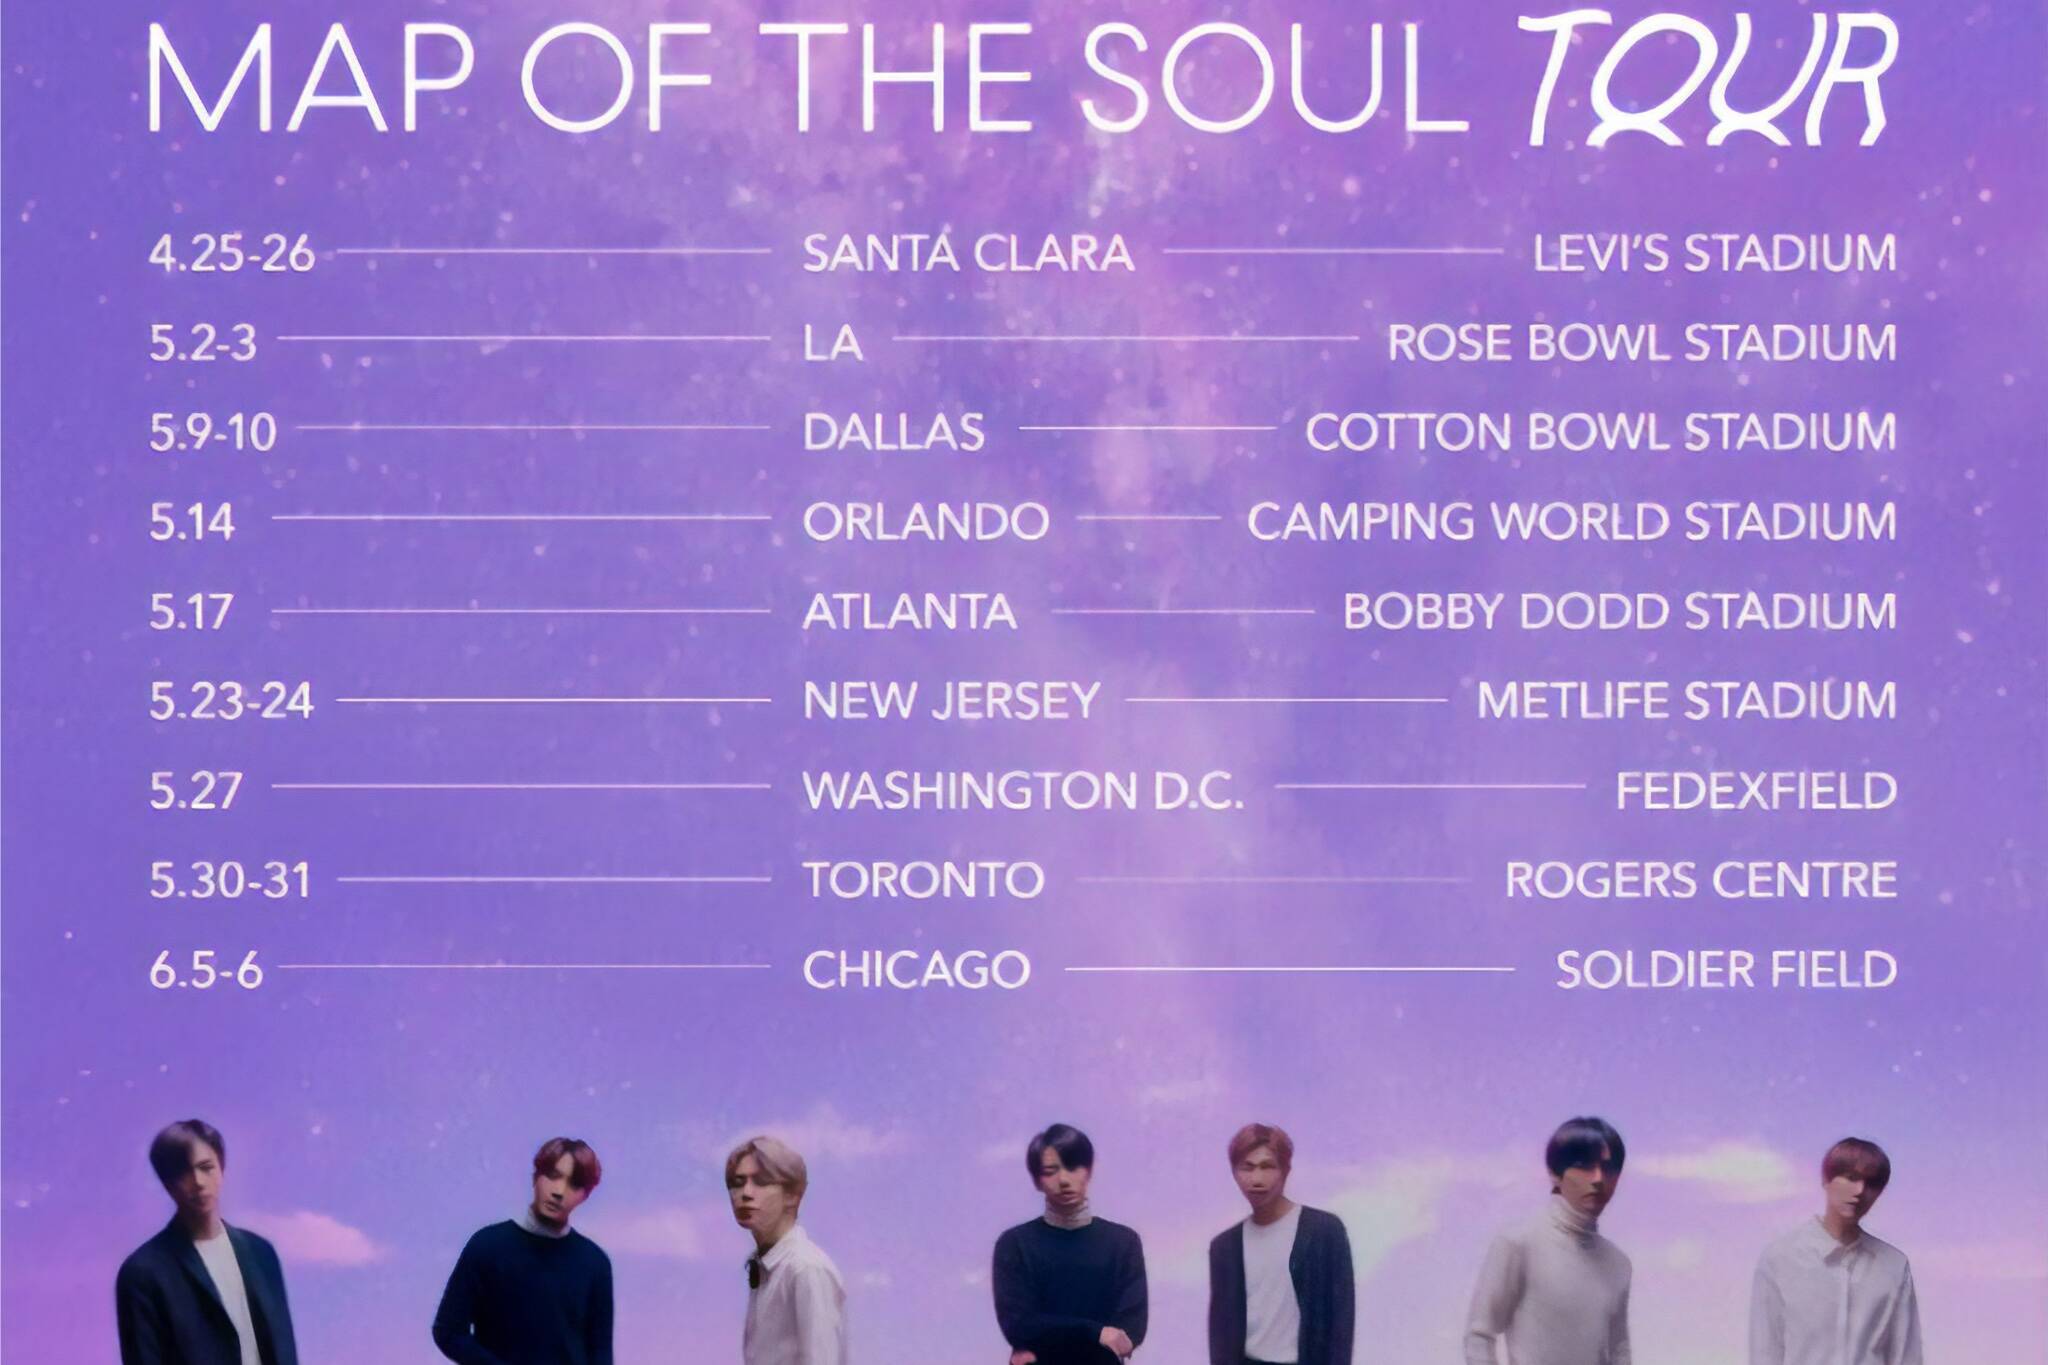 Bts World Tour 2021 Bts Is Officially Coming To Toronto On Their 2020 Concert Tour And Fans Are Going Wild